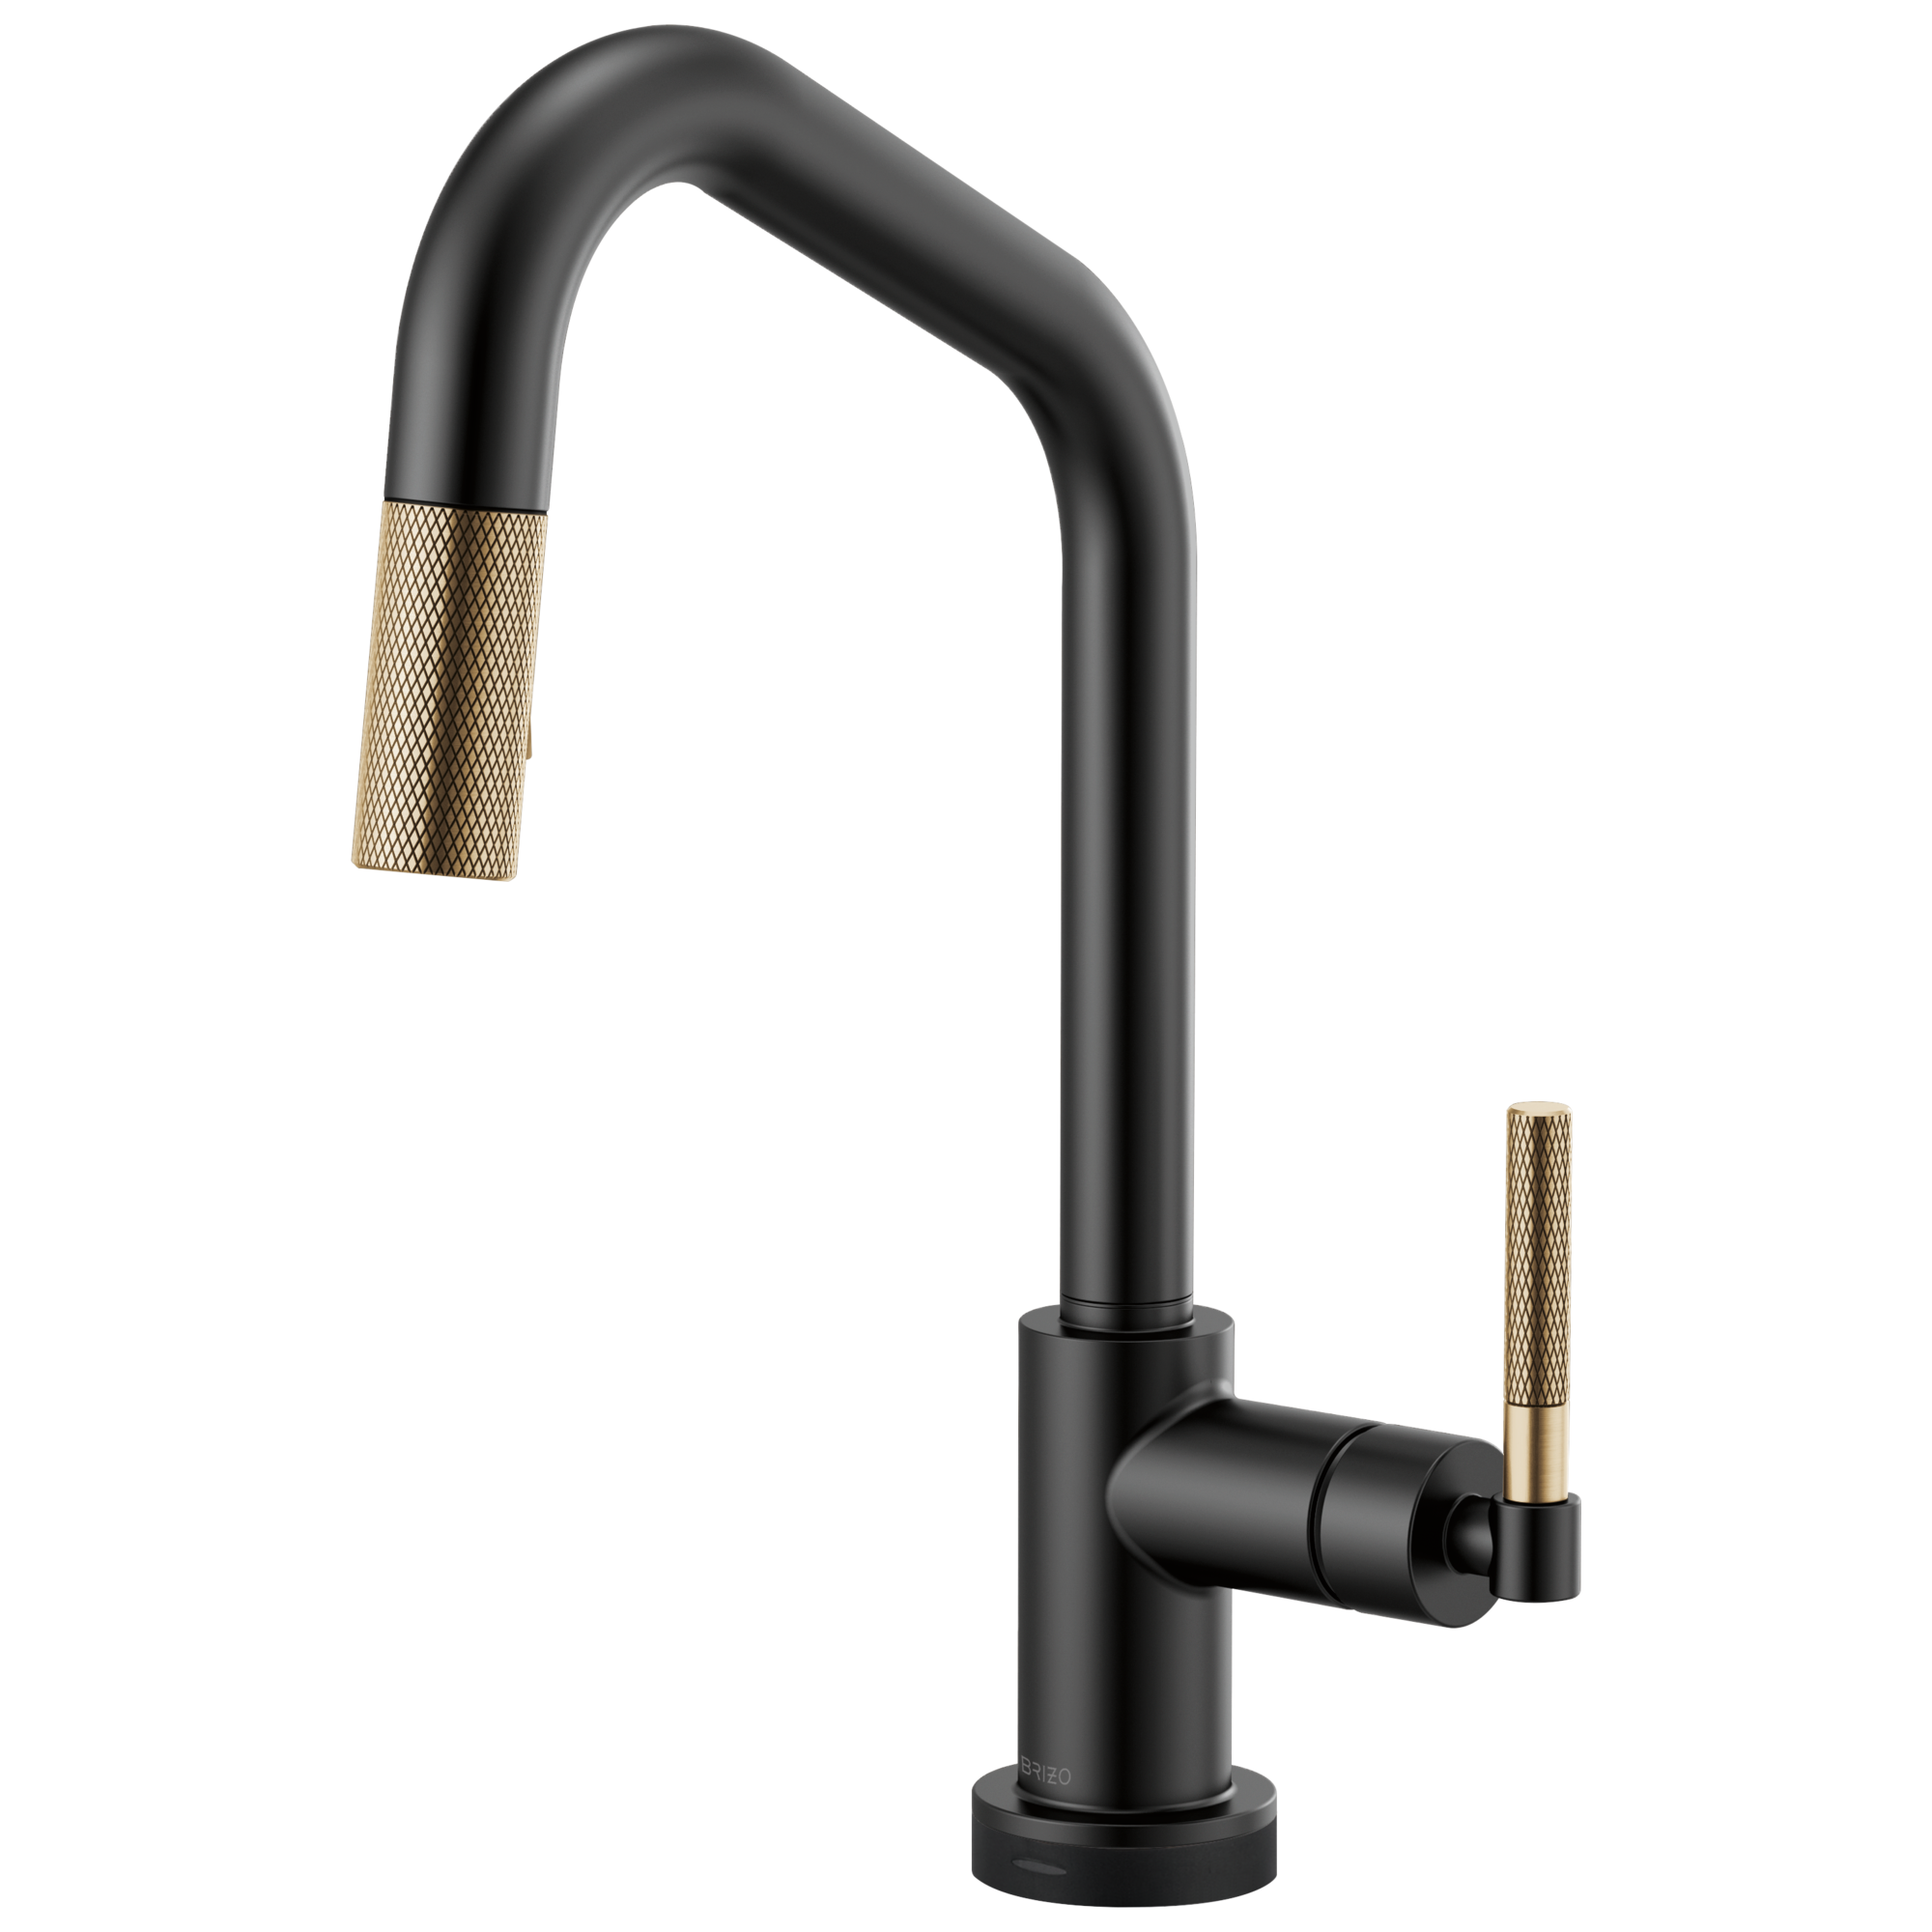 Brizo Litze Smart Touch Pull-Down Kitchen Faucet with Angled Spout and Knurled Handle